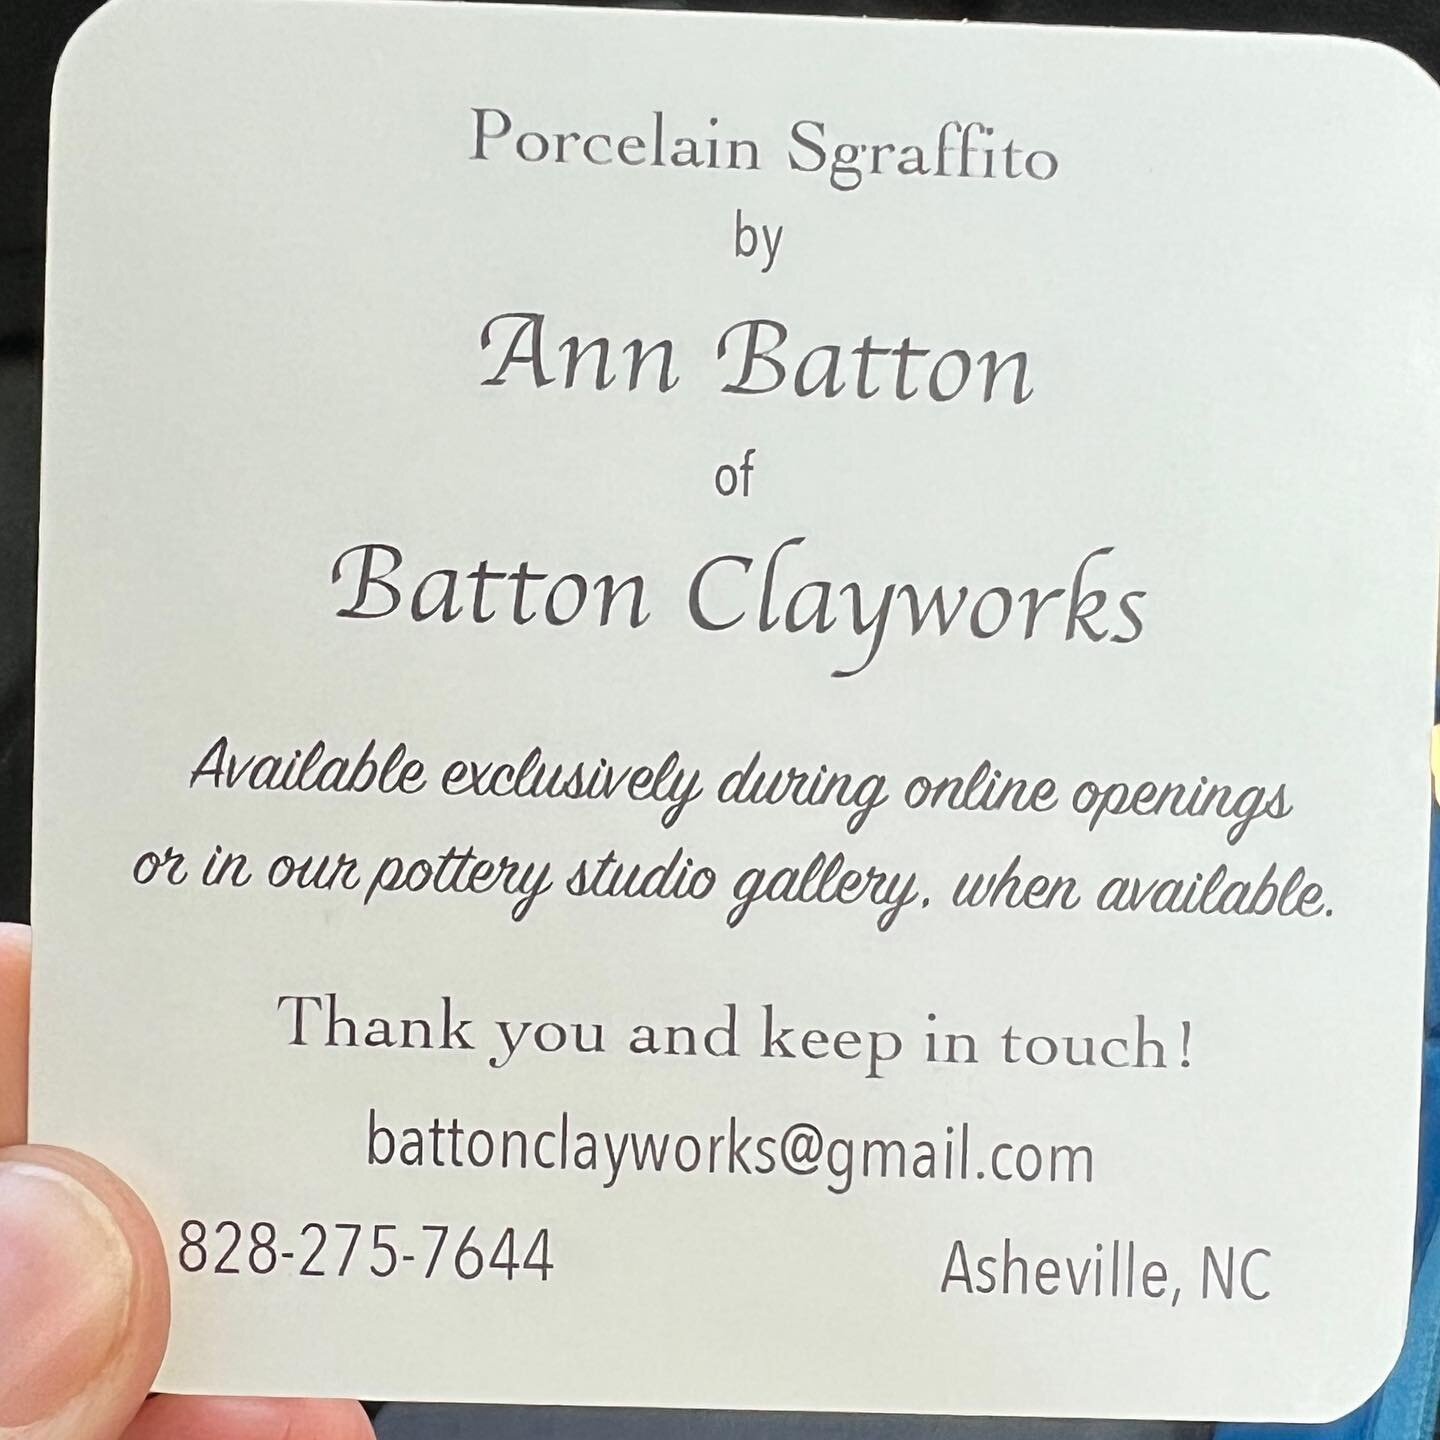 I made some business cards, kind of in a hurry.  Can you tell what I did? It&rsquo;s more annoying than wrong, I guess? 
#businessowner #businesscardsdesign